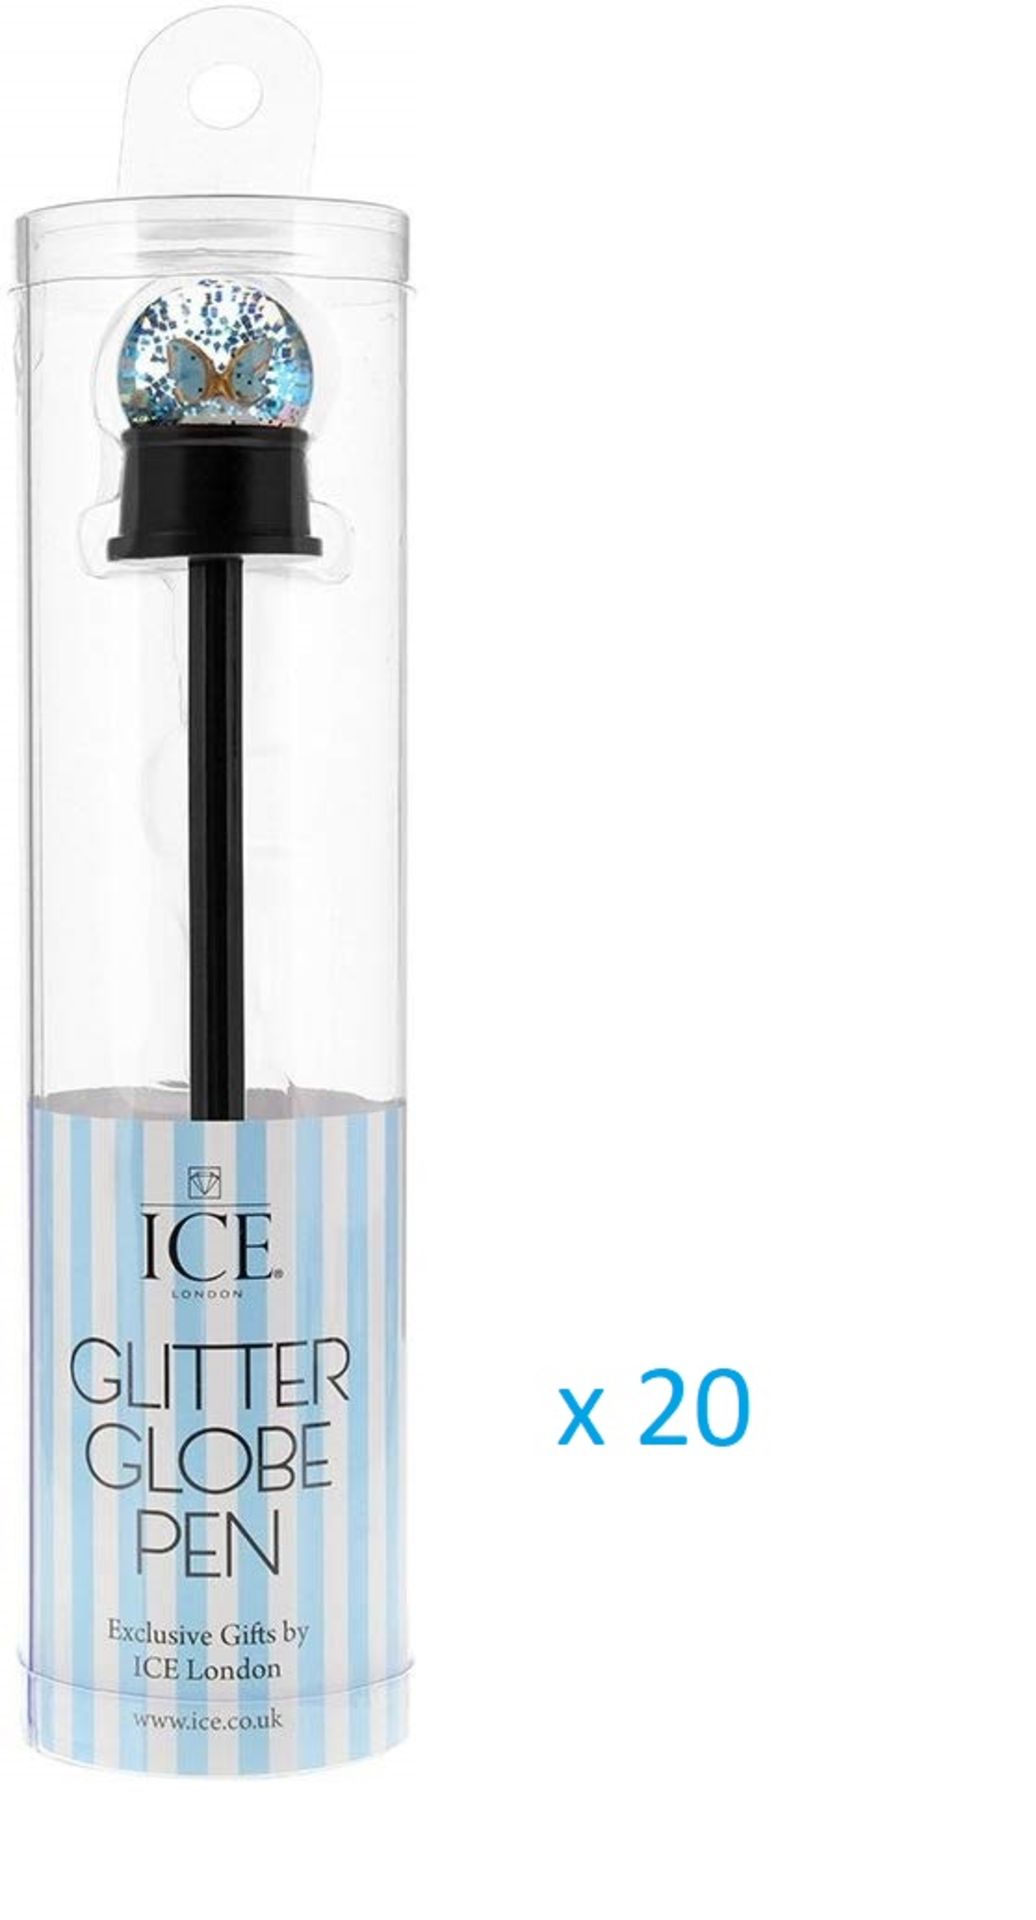 20 x ICE London Christmas "Butterfly" Glitter Globe Pens - Brand New Sealed Stock - Ideal Stocking